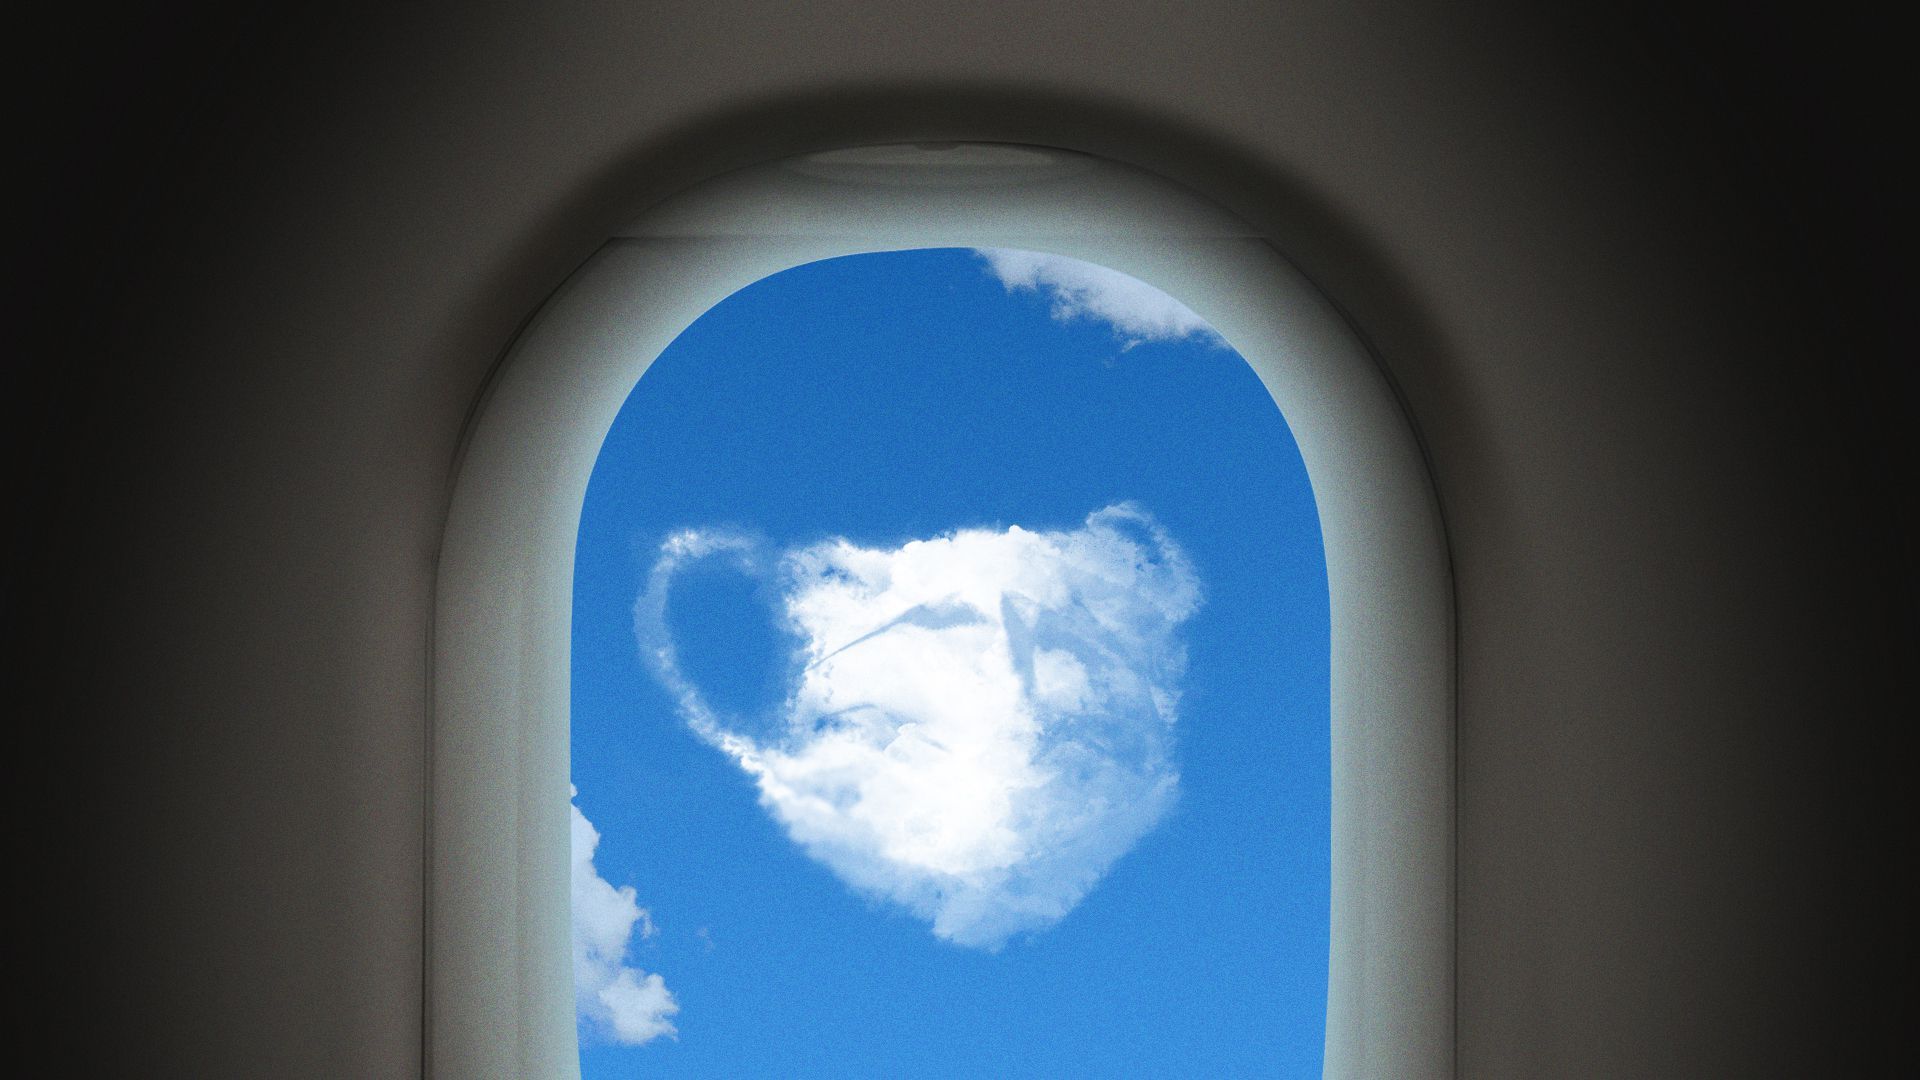 Illustration of a mask-shaped cloud through an airplane window.